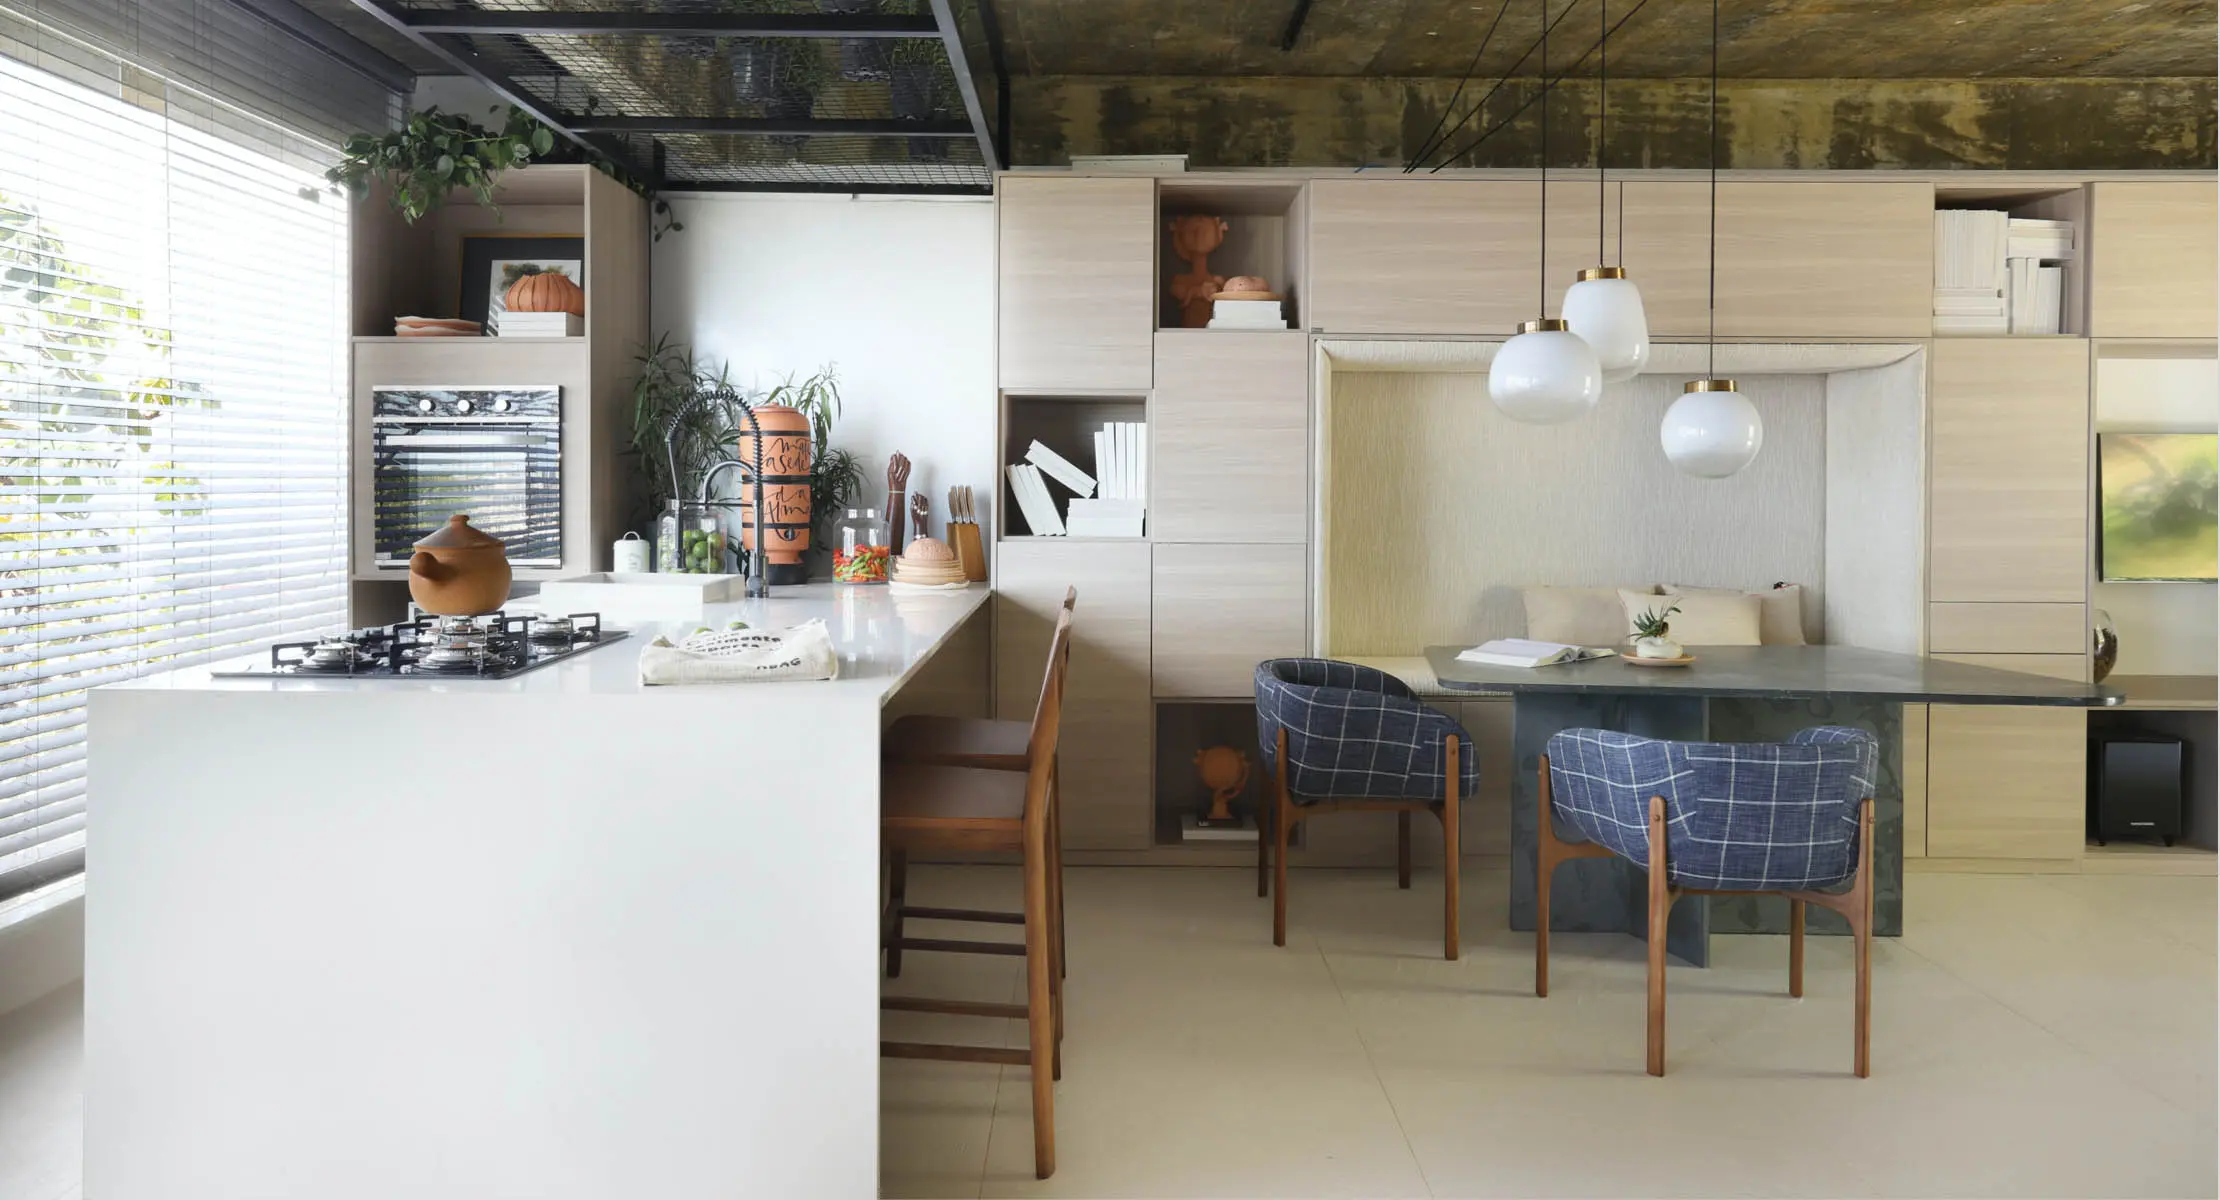 Image of cocinas 09 header in A kitchen full of character - Cosentino